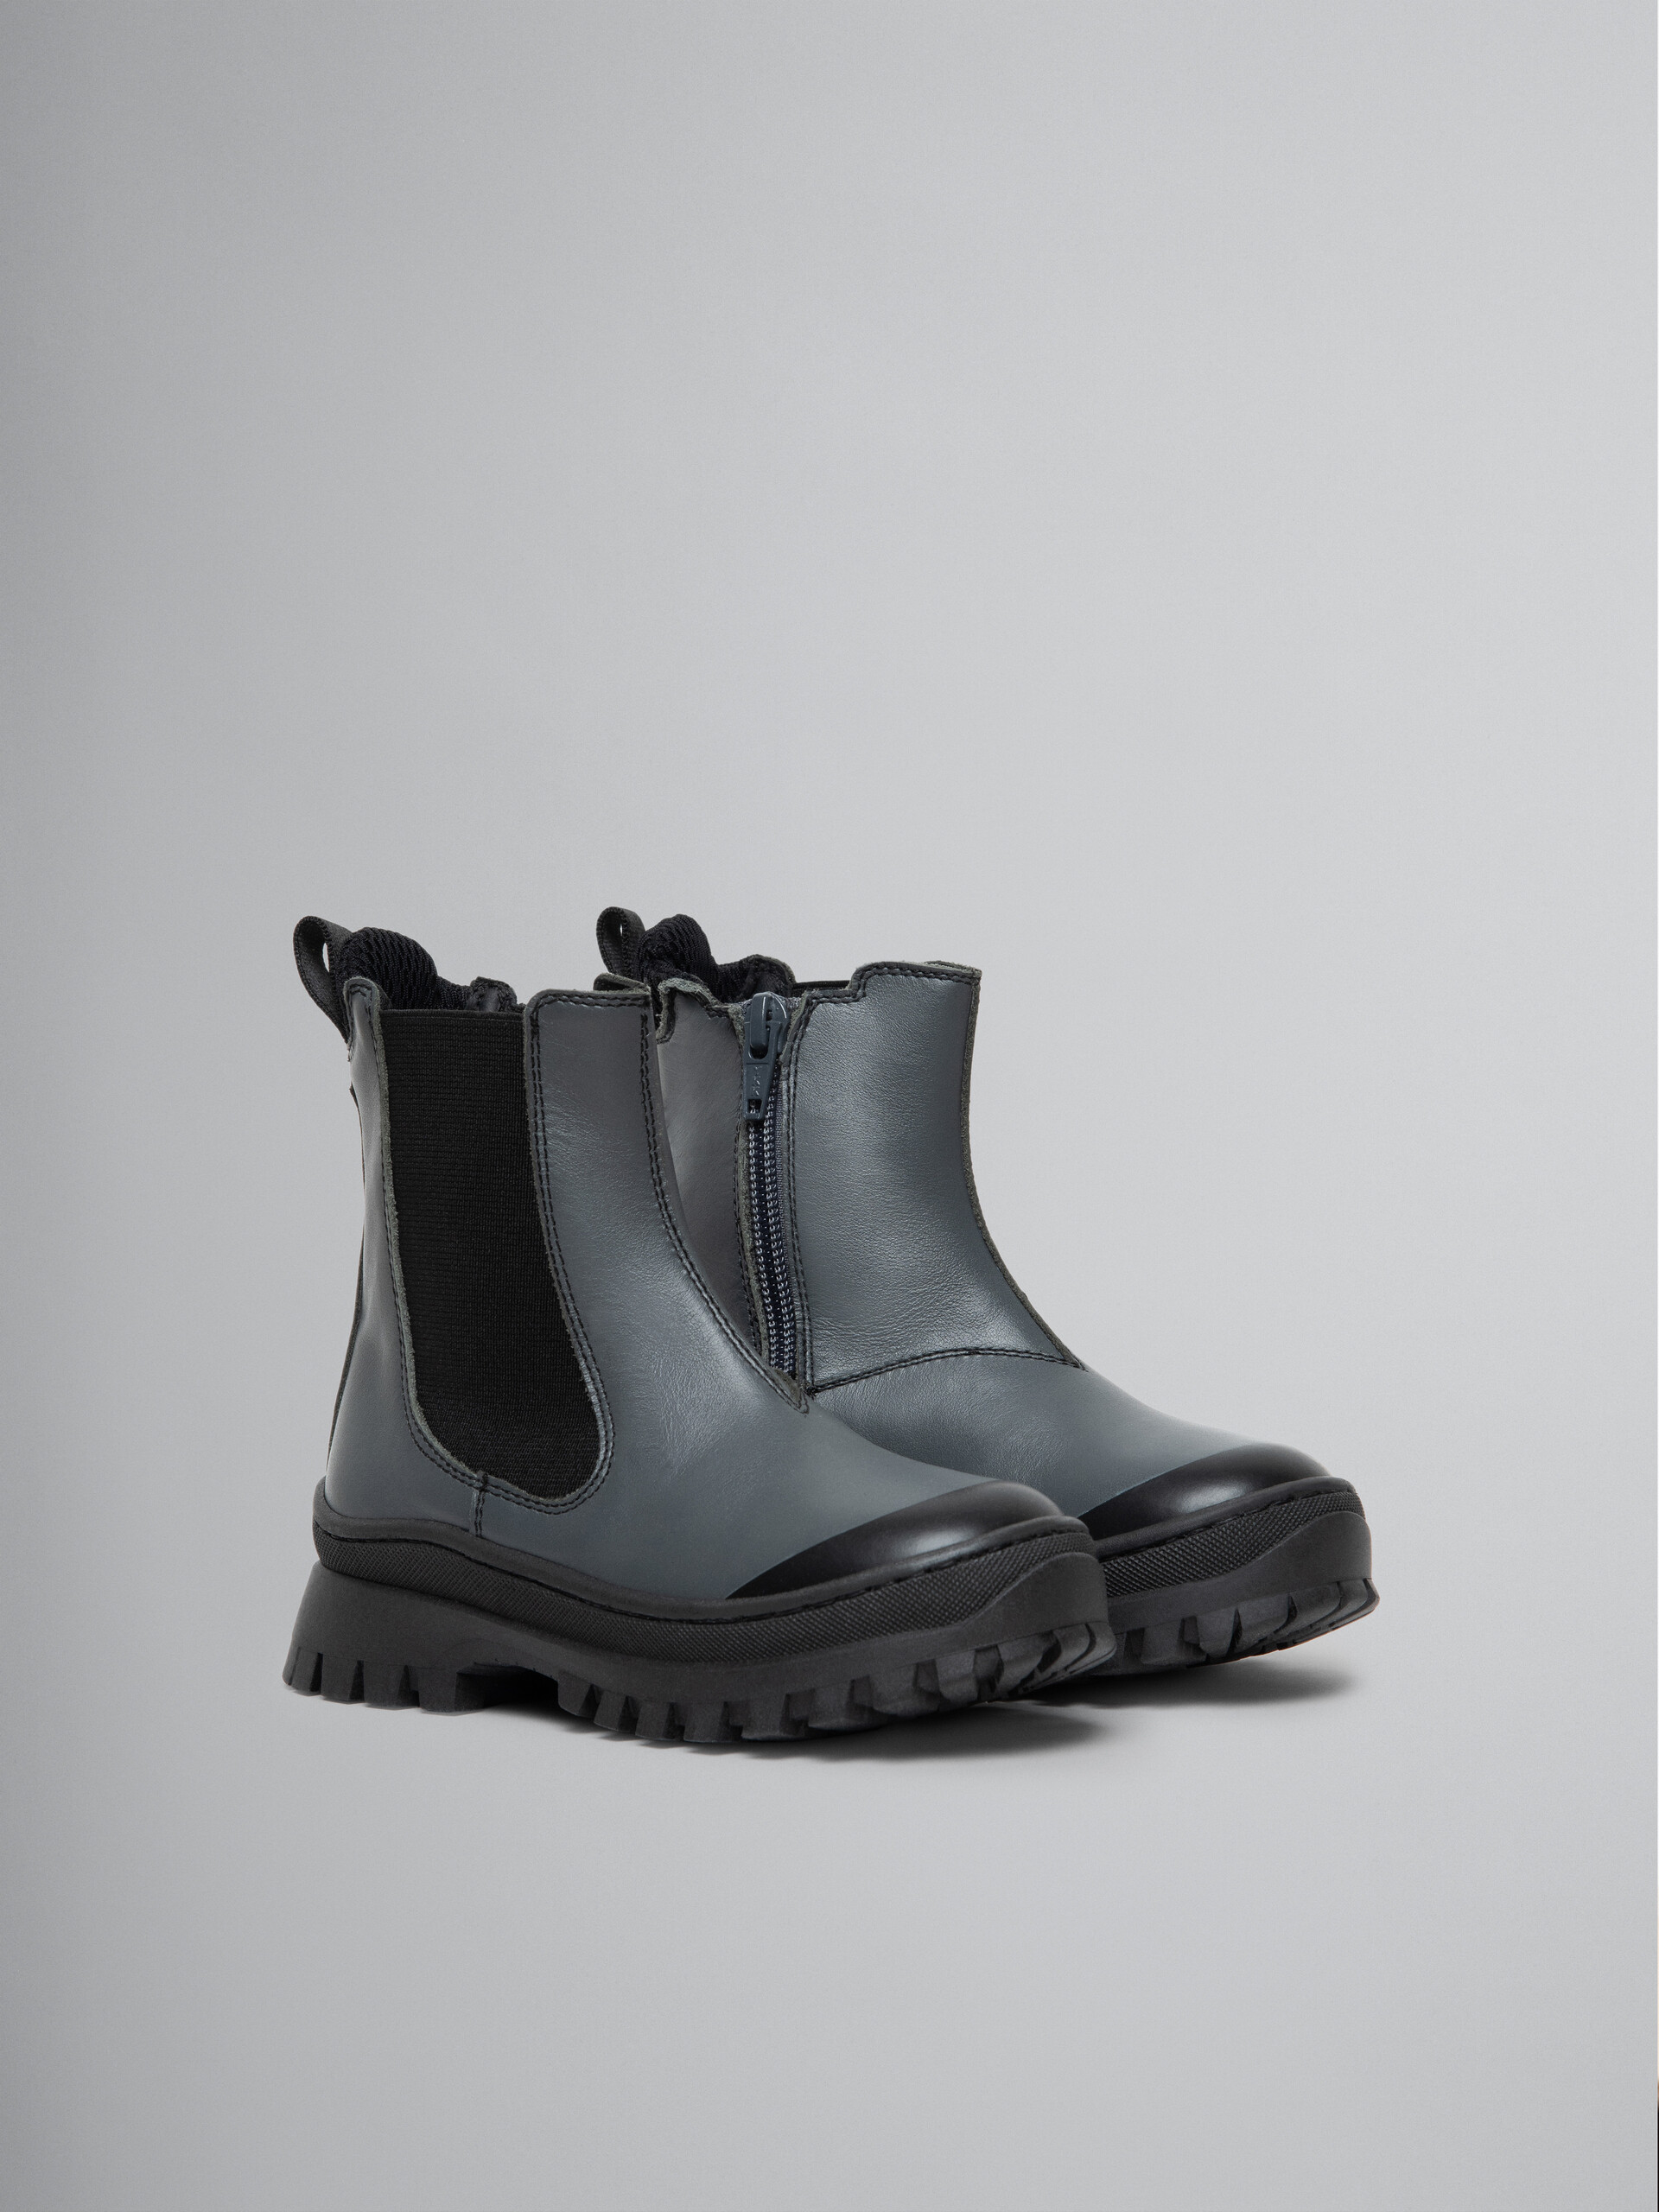 Grey leather Chelsea boot - Other accessories - Image 2